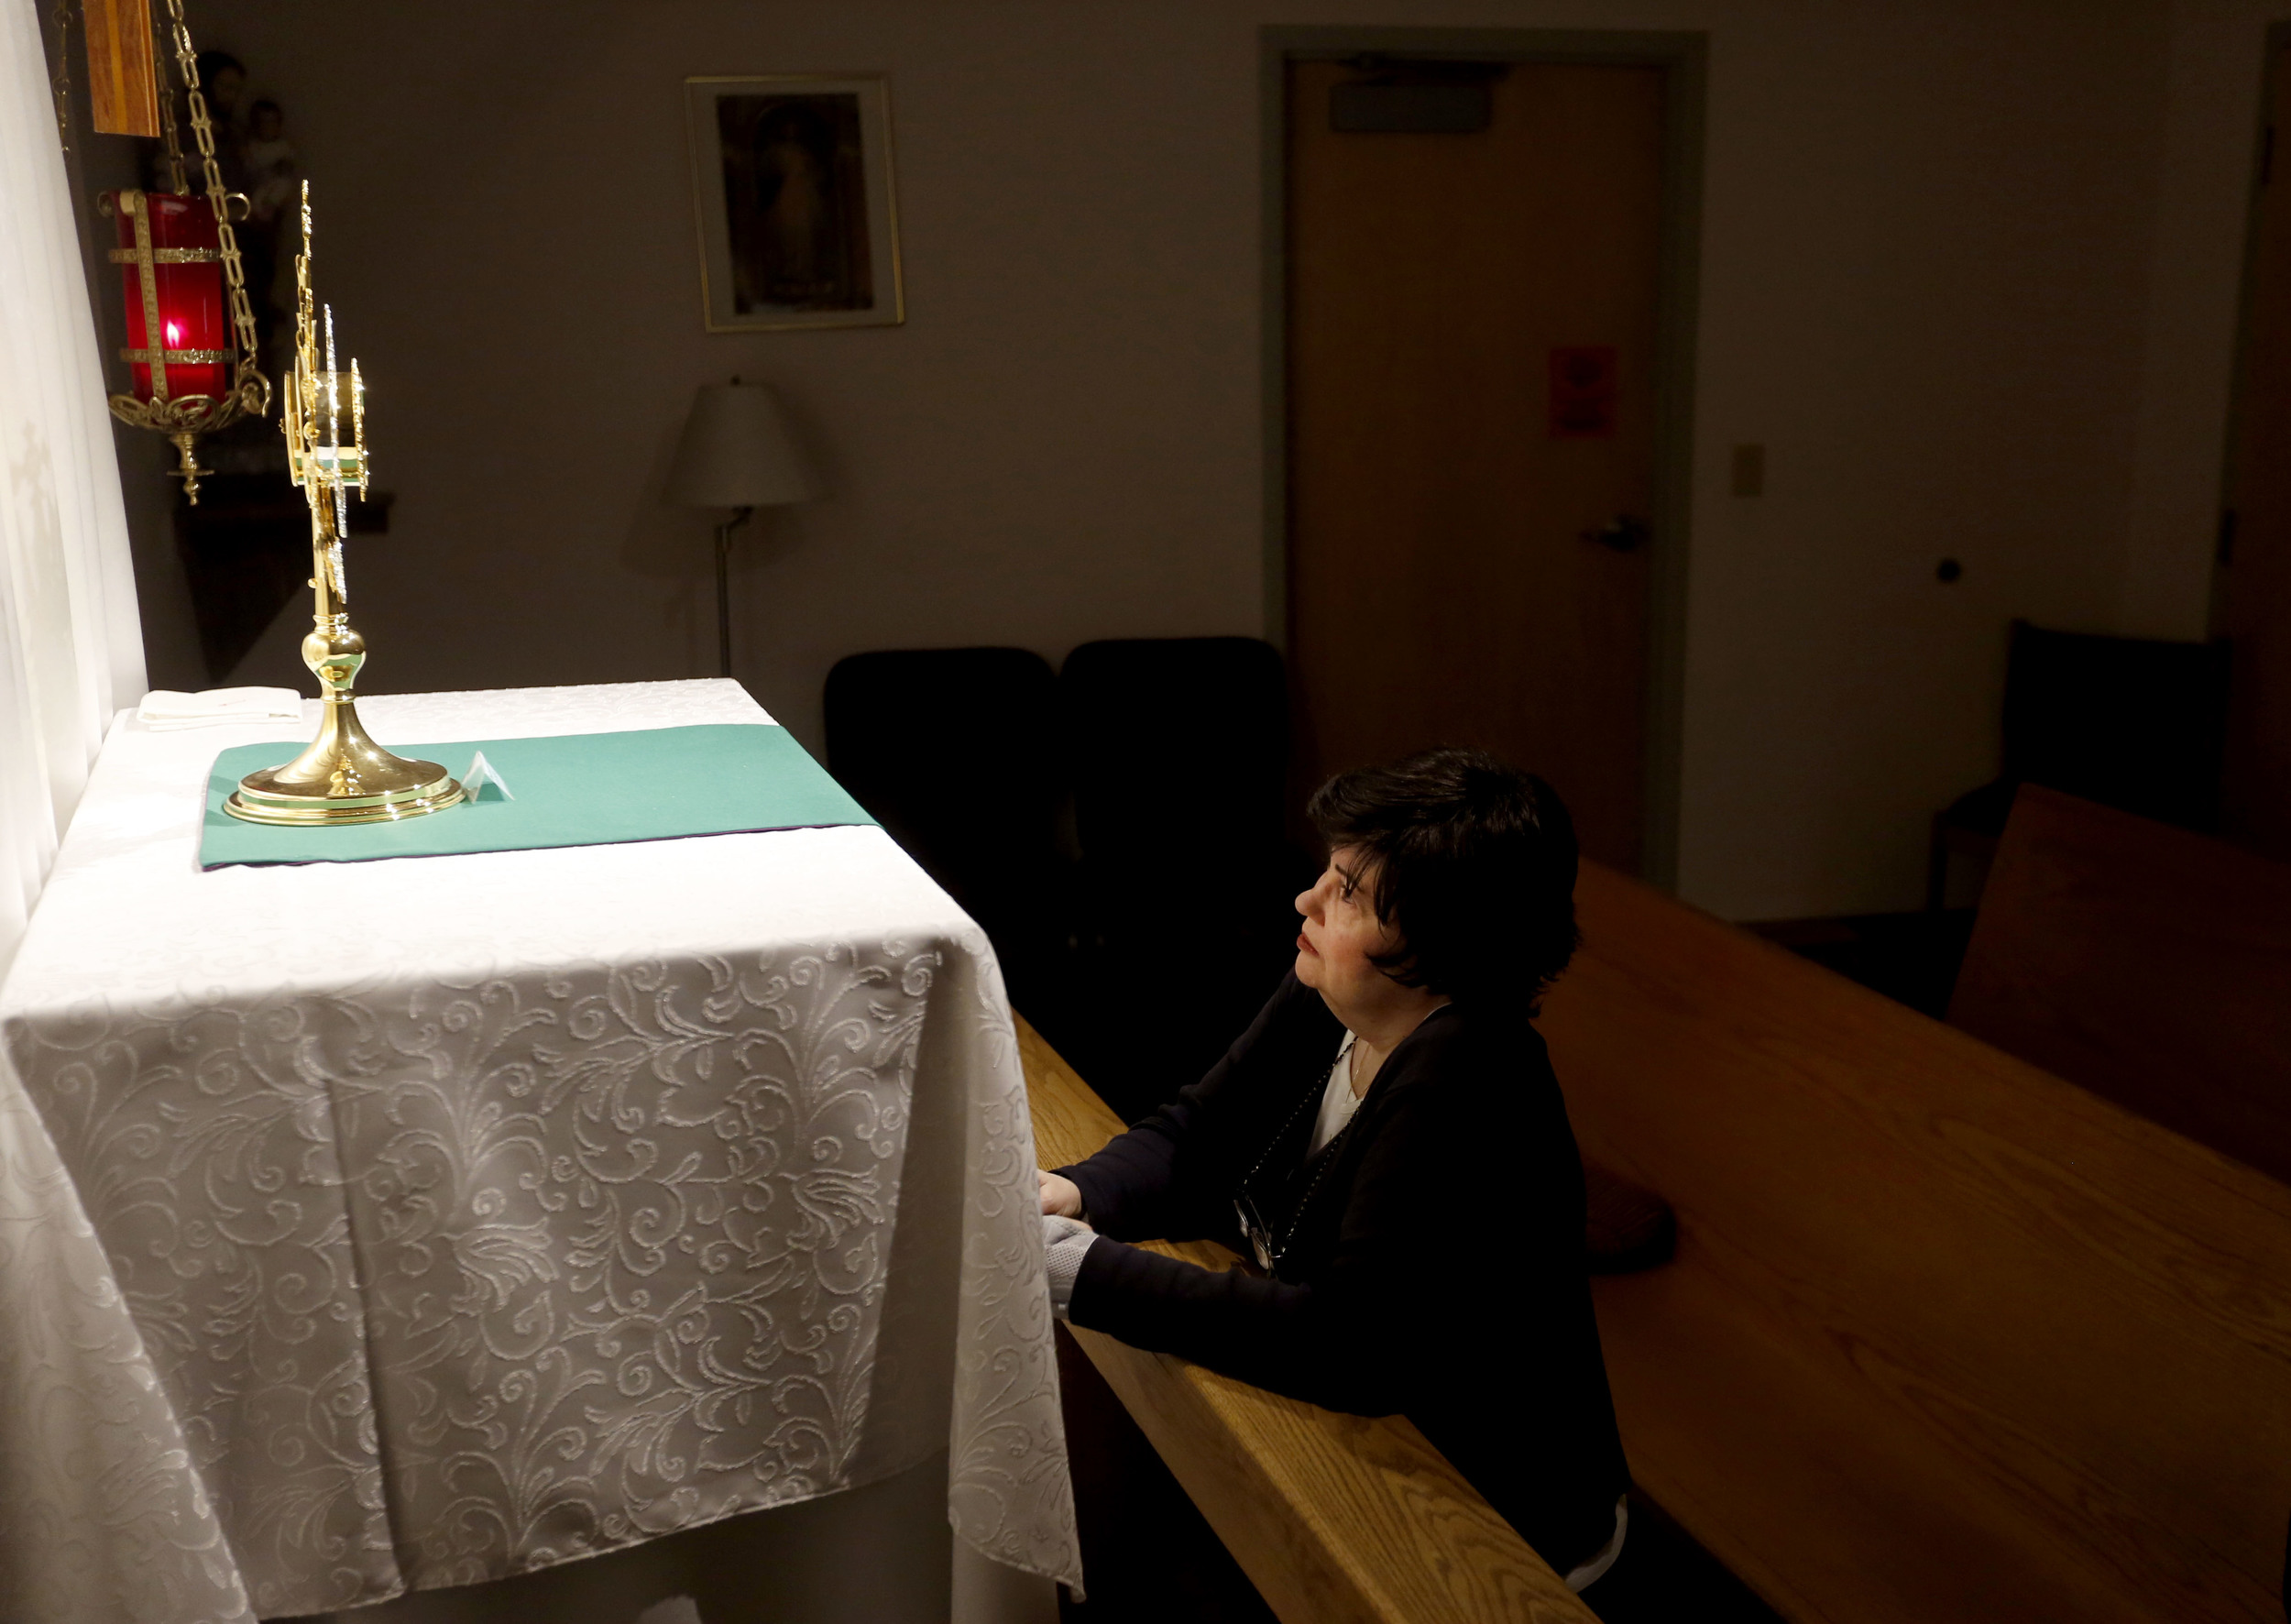   Carol LeCompte, 66, of Kennewick, is the coordinator of the perpetual adoration devotion and ministry program at St. Joseph Catholic Church in Kennewick. About 200 volunteers take turns praying and worshipping God in the chapel around the clock.   